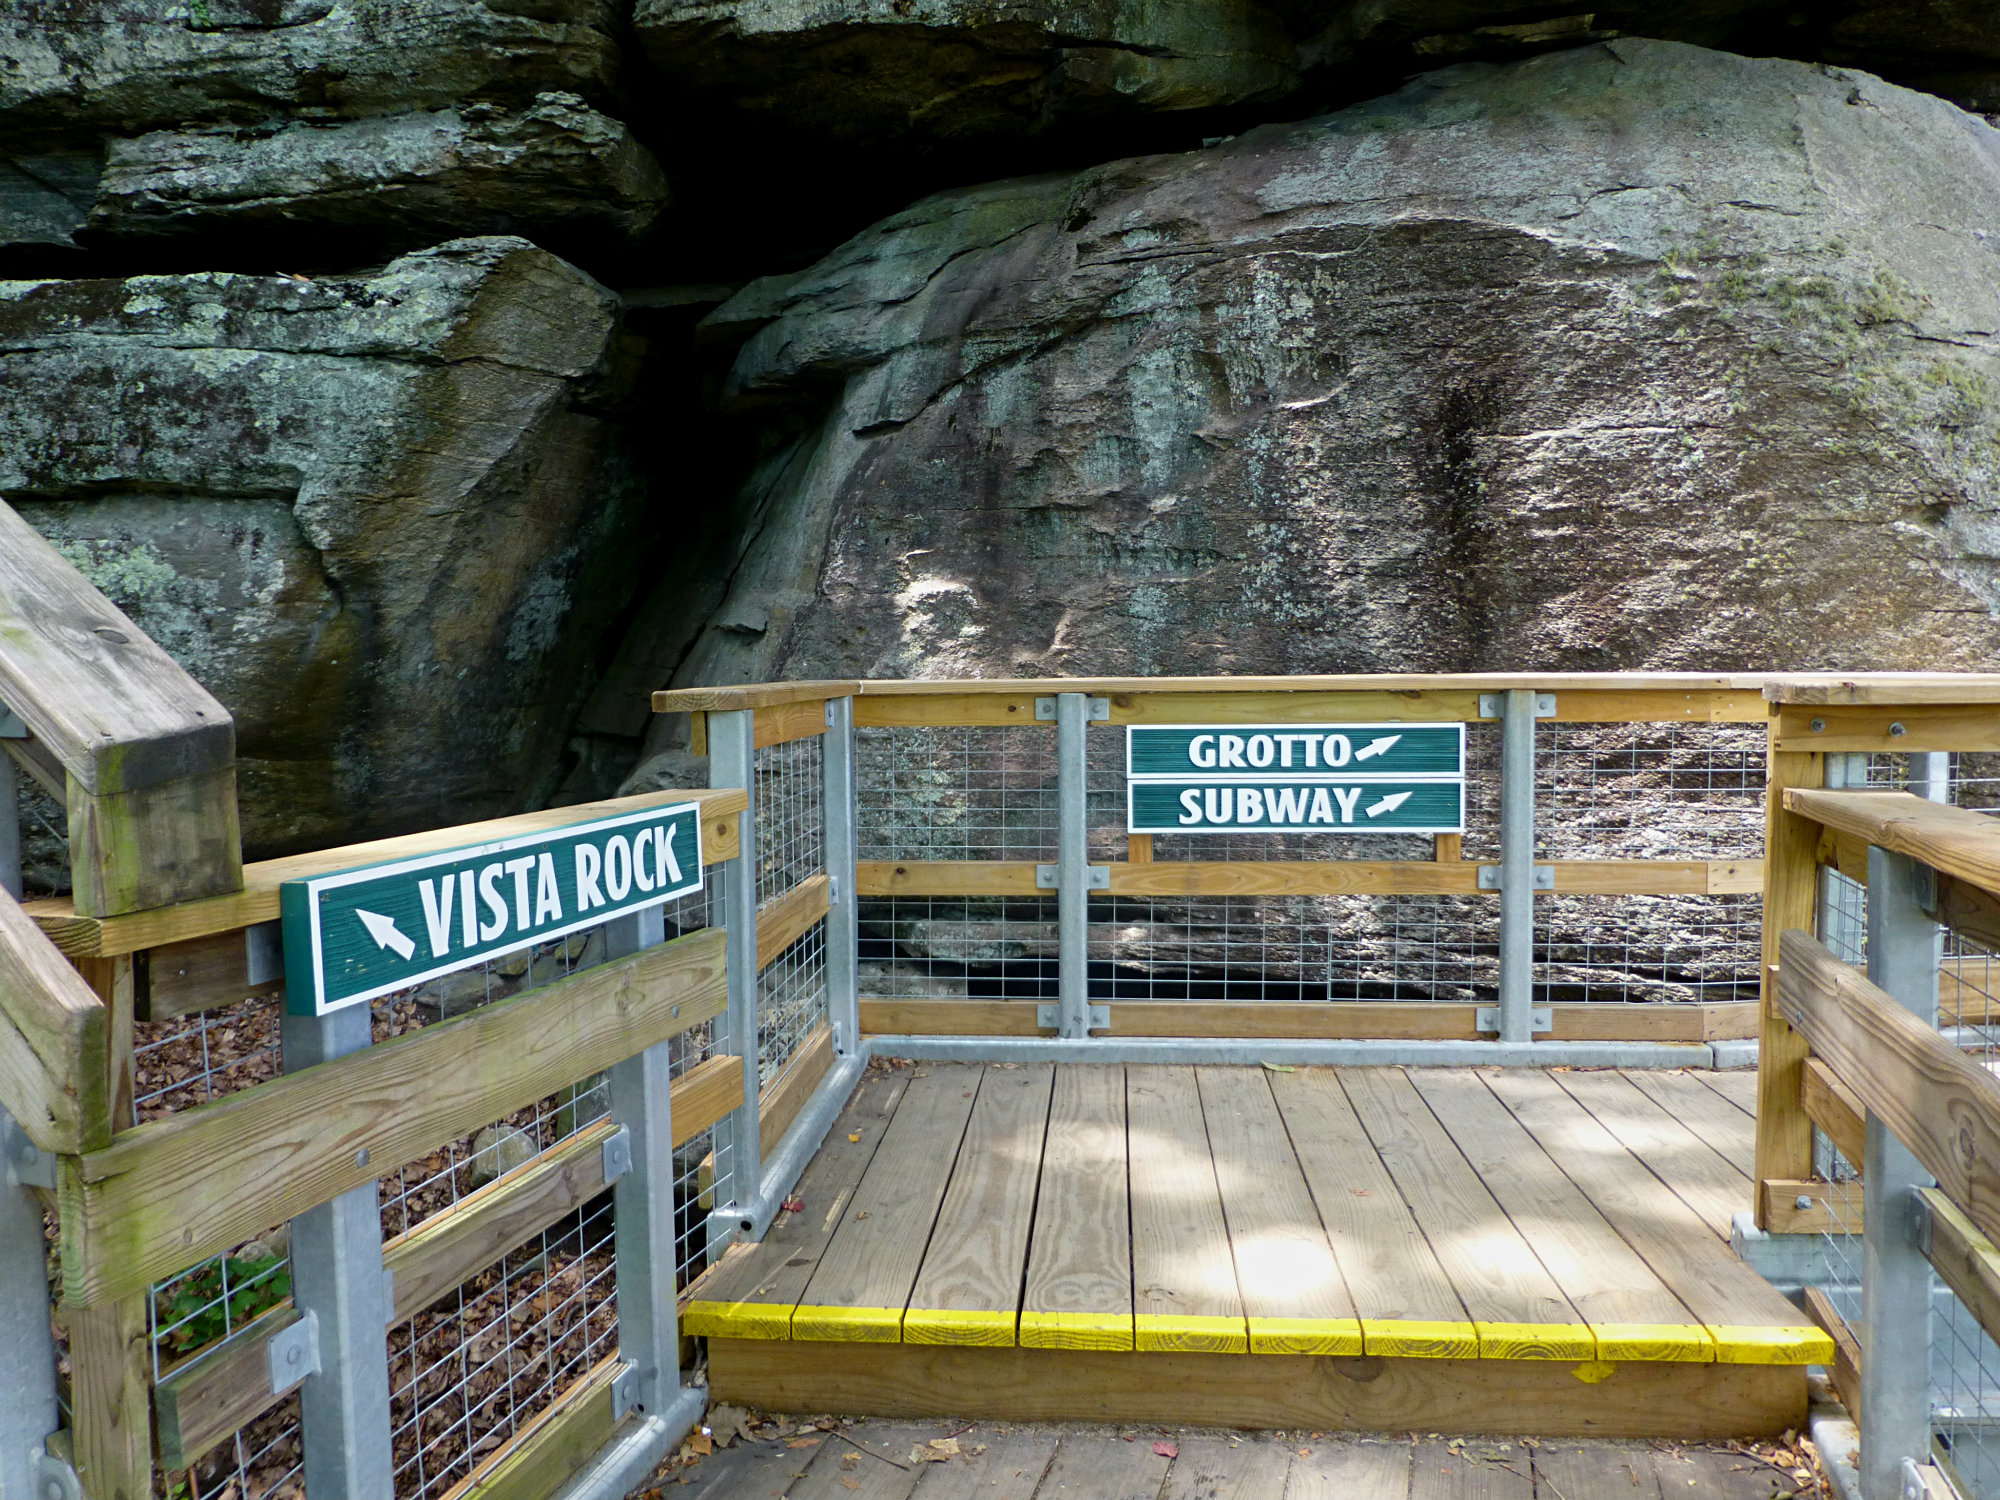 Wooden boardwalk with signage leading to Grotto, Subway, and Vista Rock a boulder wall in the background